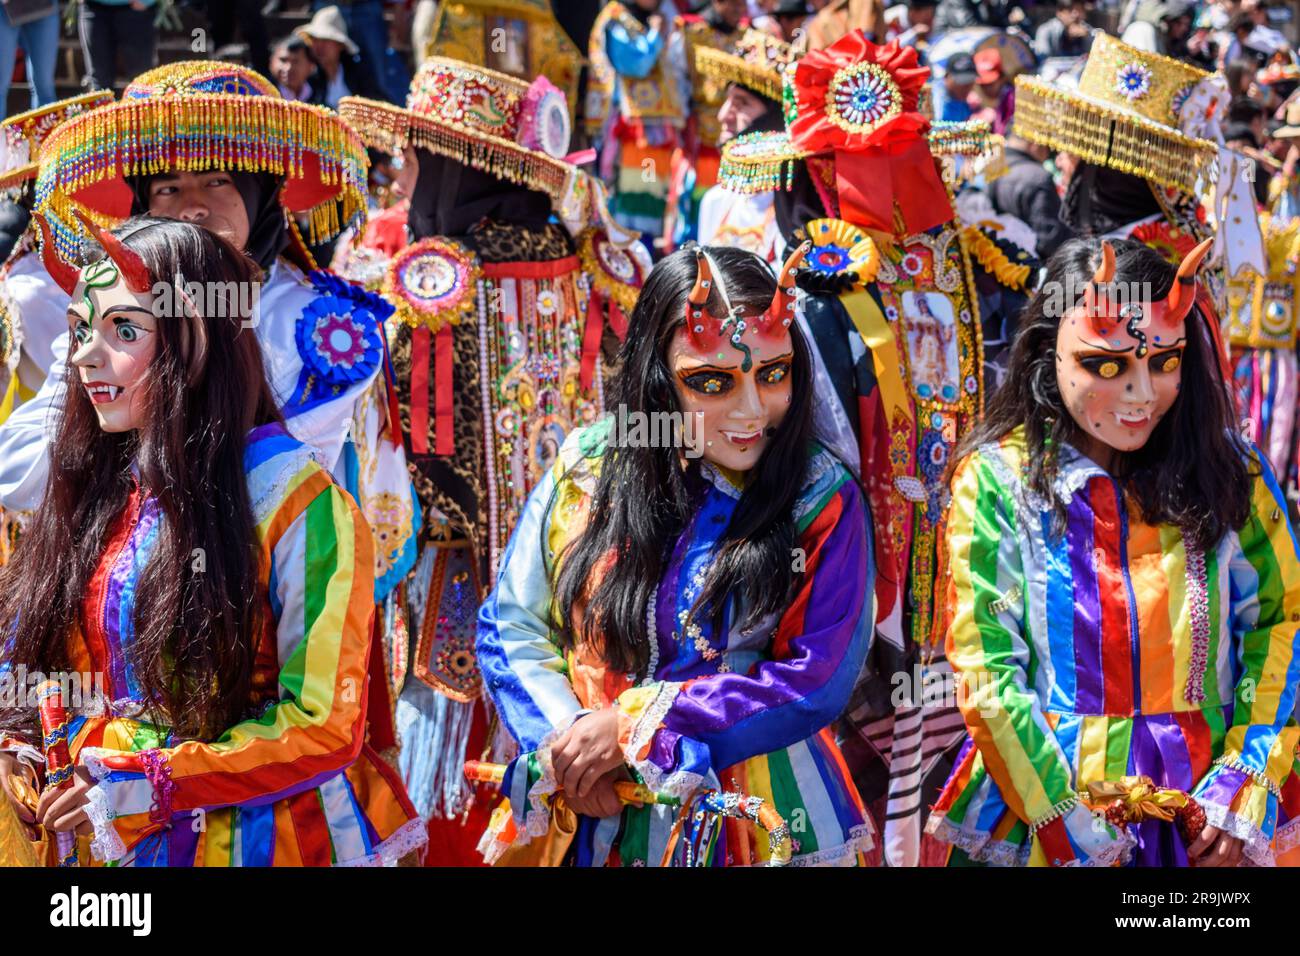 Cusco, a cultural fiesta, people dressed in traditional colourful costumes with masks and hats, brightly coloured streamers. Stock Photo